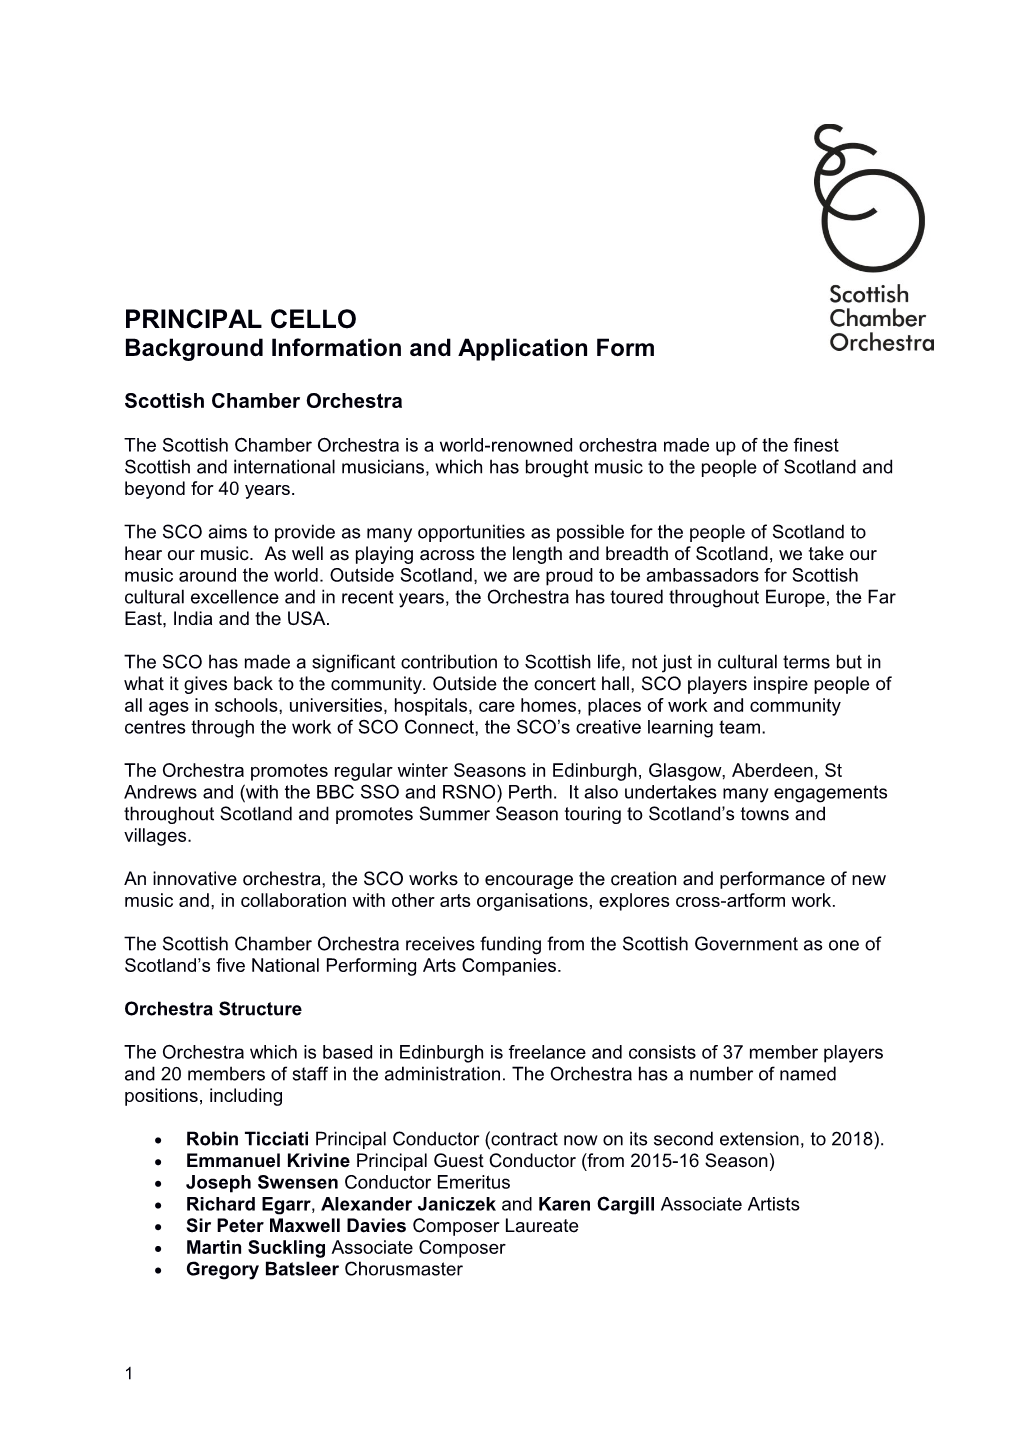 PRINCIPAL CELLO Background Information and Application Form